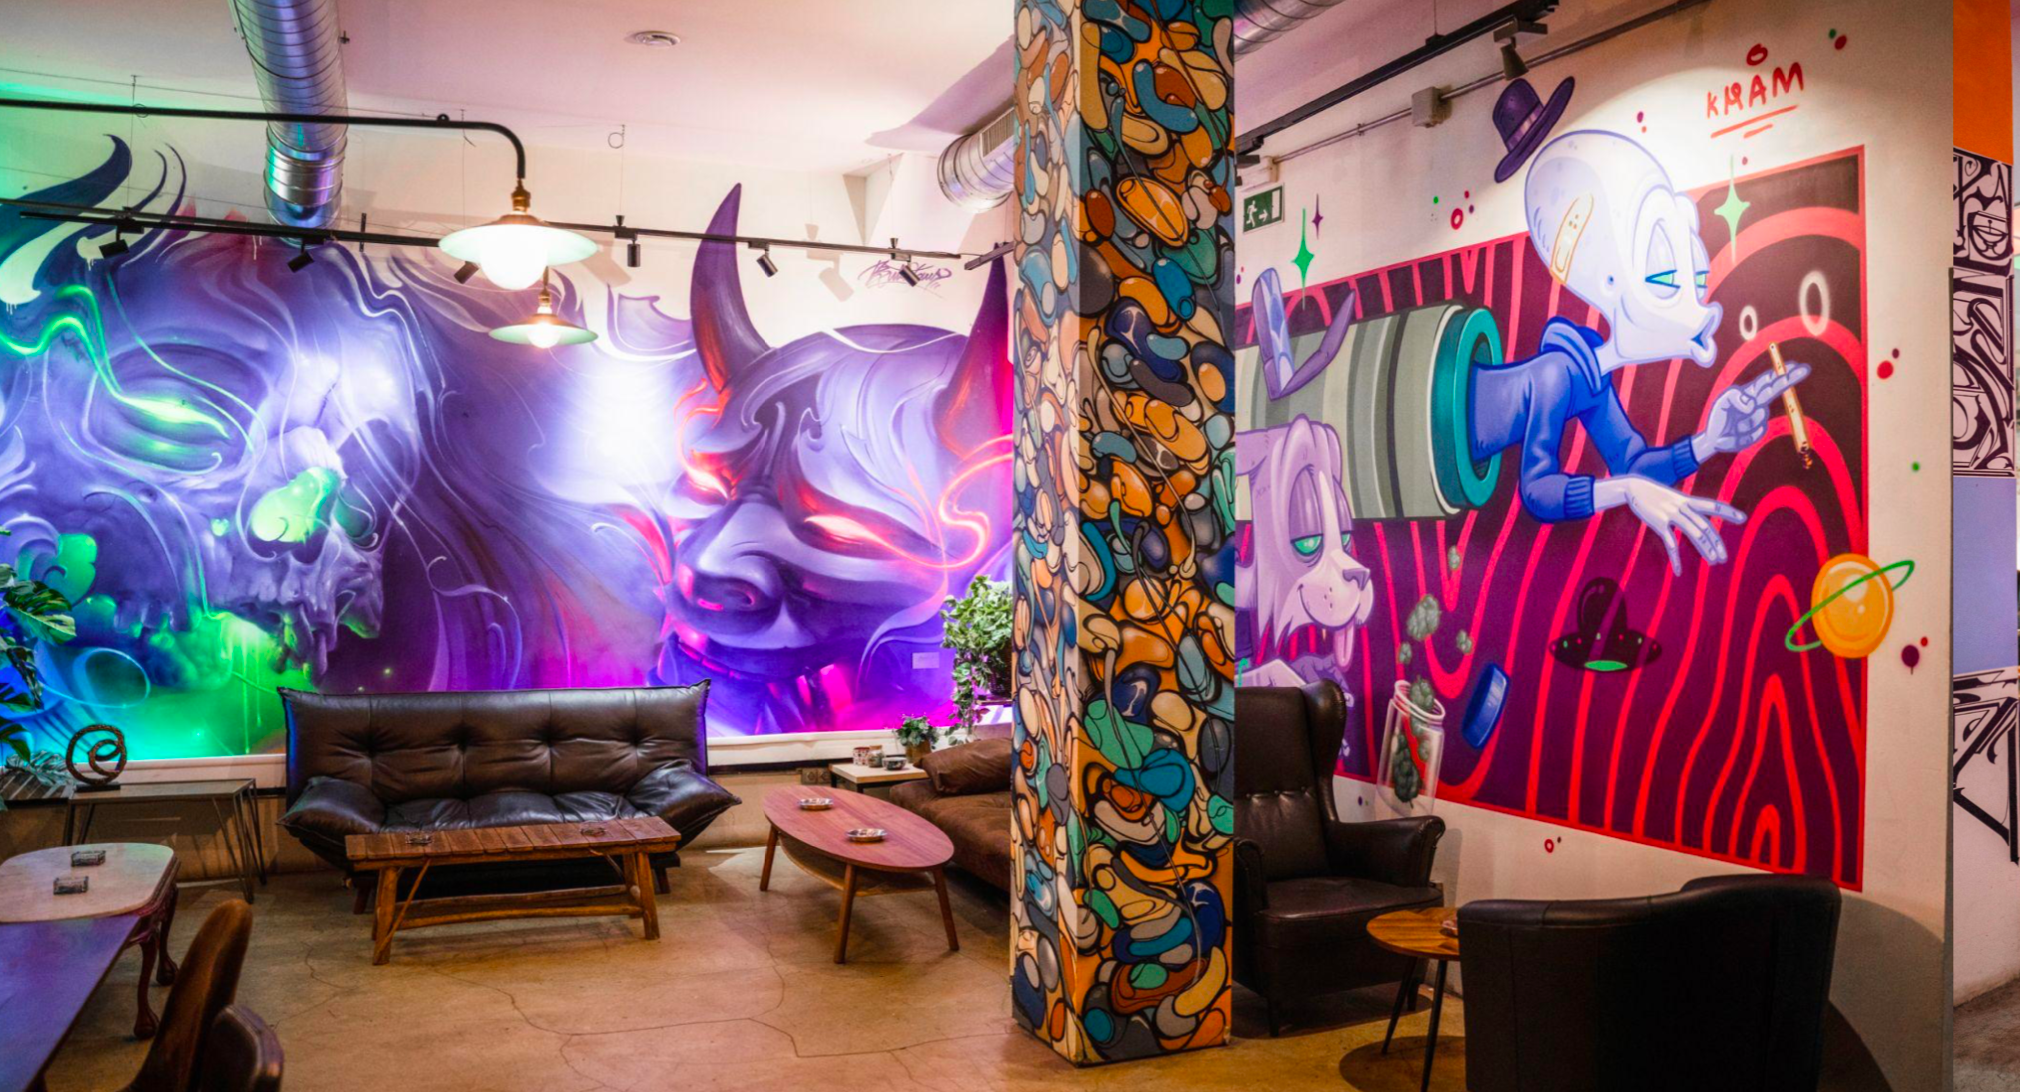 California Street Culture Brand CRTFD Brings Its Fashion, Flavors And Cannabis To Europe, Opens Cannabis Club In Barcelona